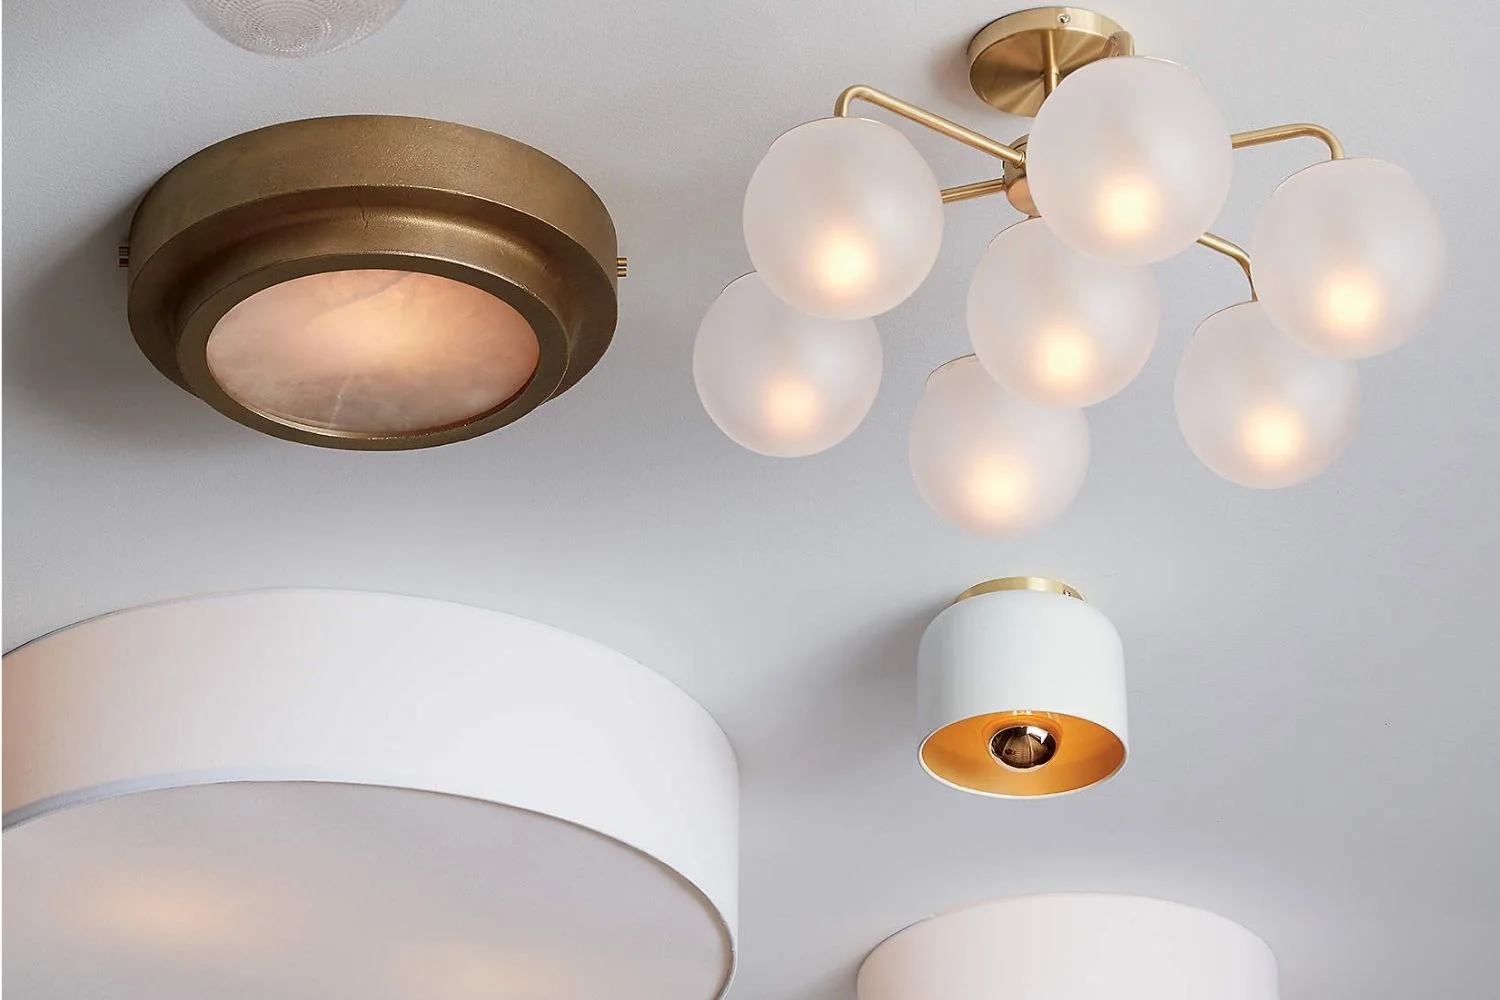 How To Remove A Flush Mount Ceiling Light